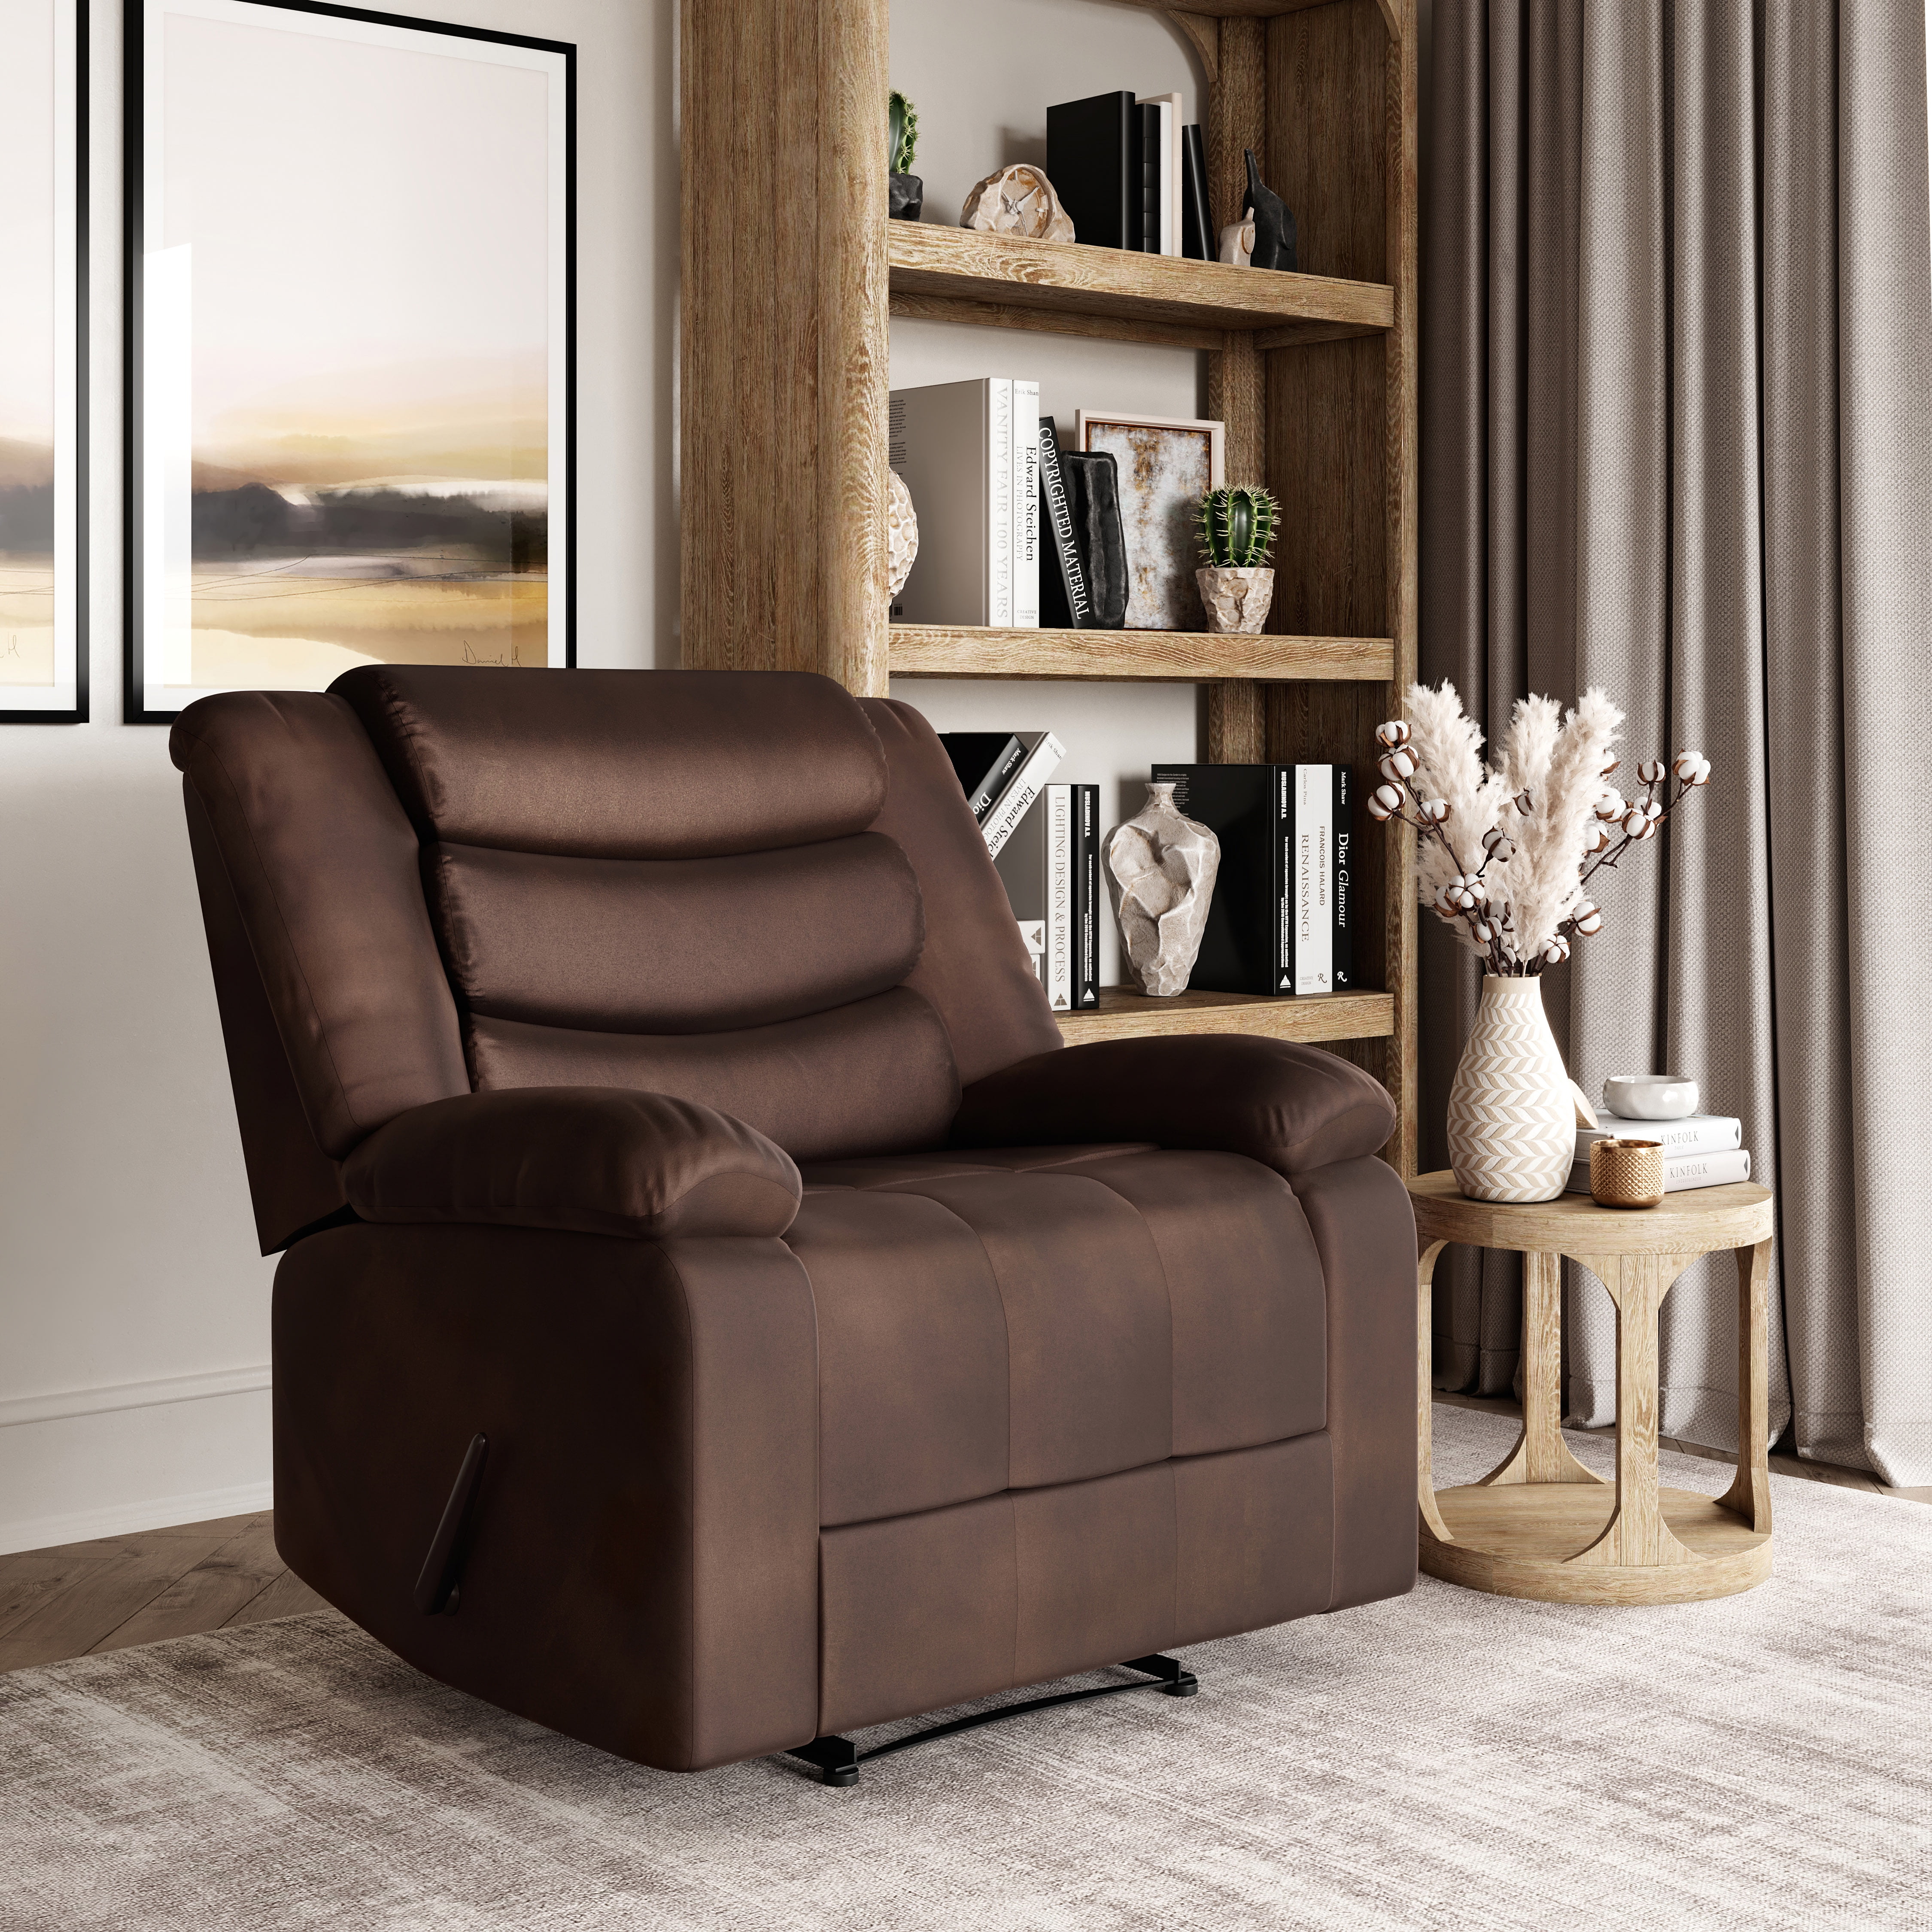  Recliner Chair Walmart Canada for Small Space